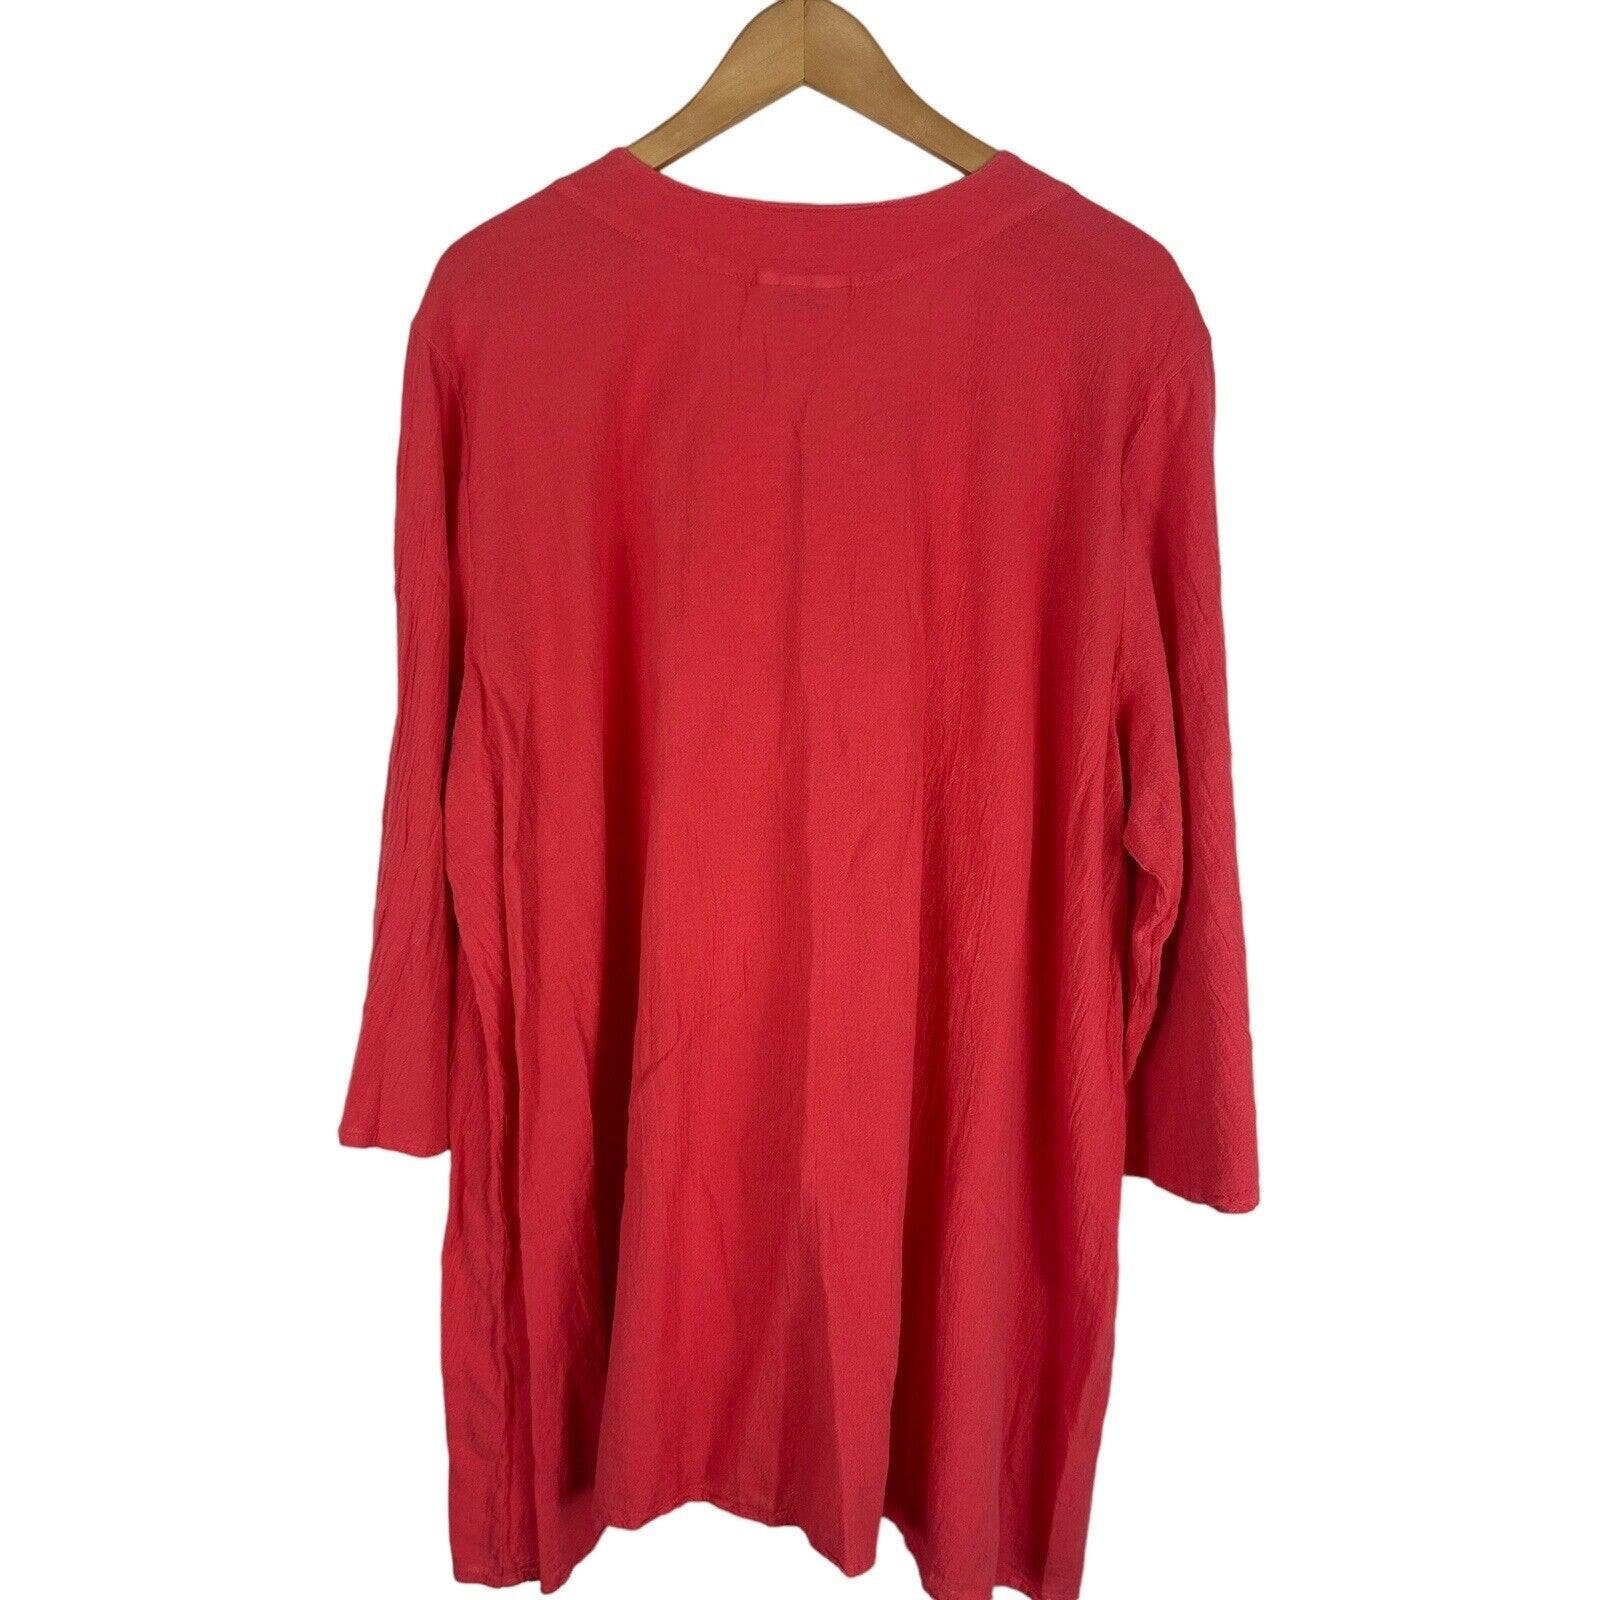 save up to 70% Cottonways Lagenlook 3/4 Wide Sleeve Top Tunic One Size Gauze 100% Cotton Coral oadaTjYgF Everyday Low Prices